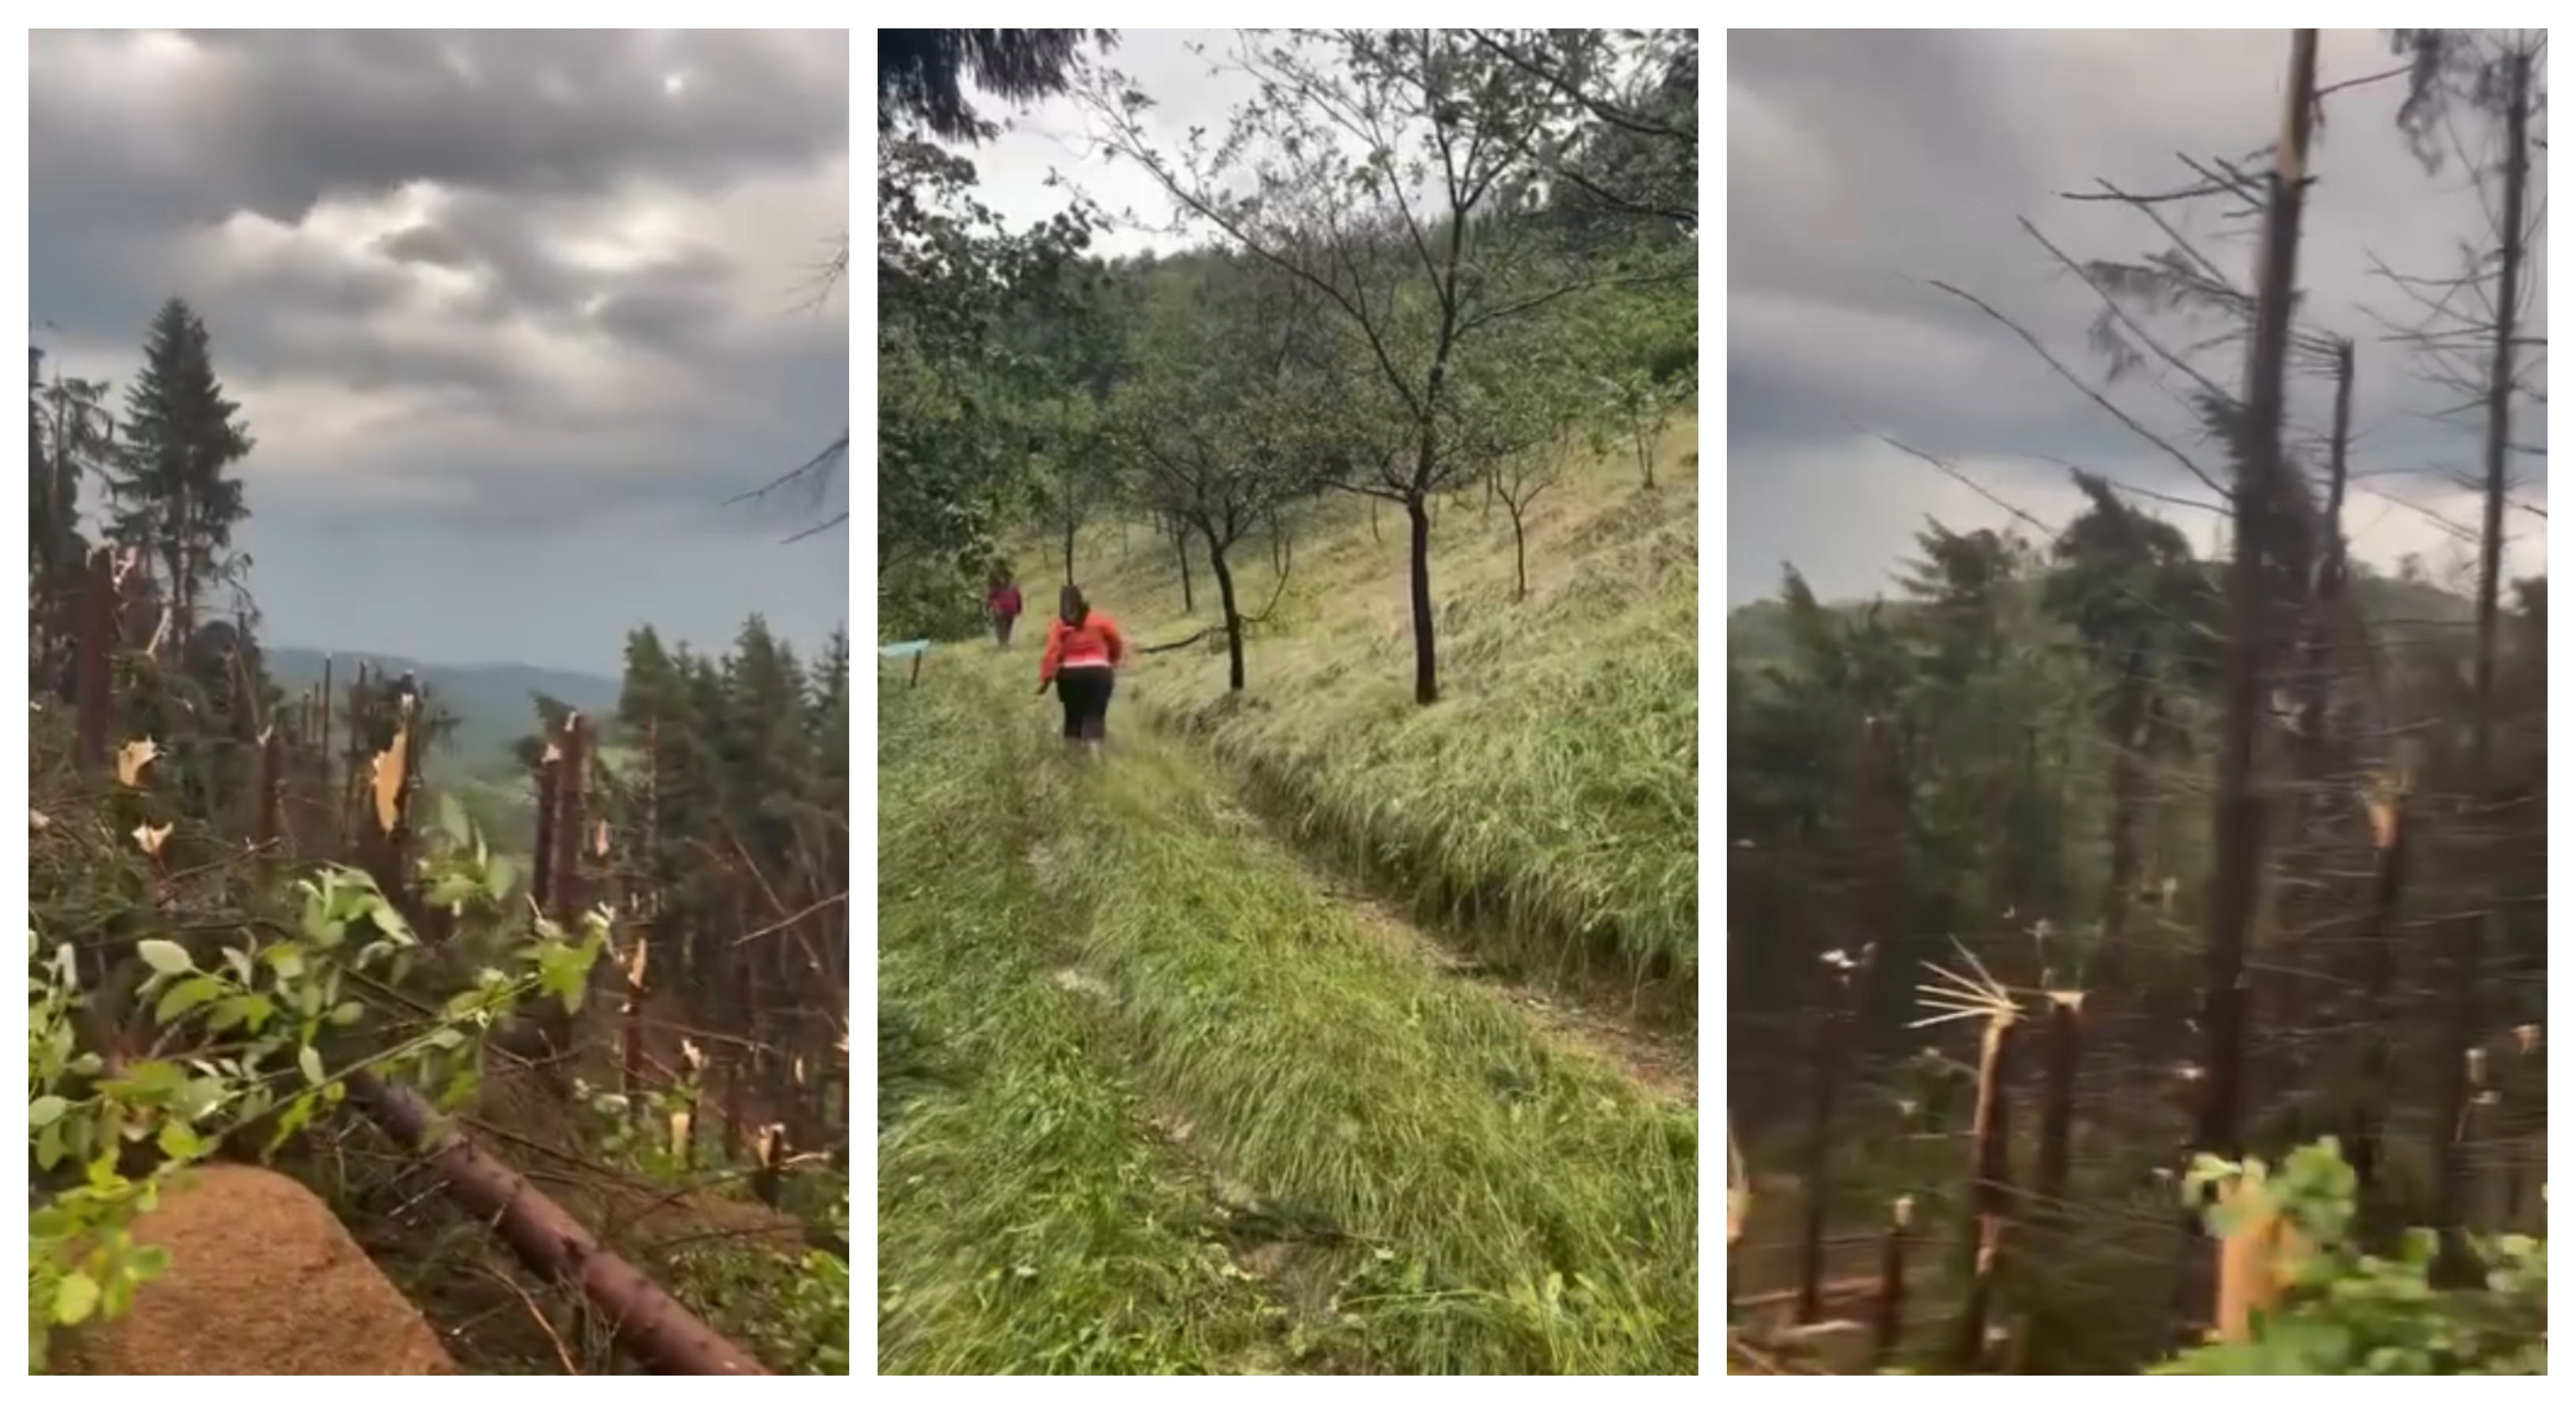 Northern Romania: Man struck by lightning, storm winds bring down a forest in Maramureș